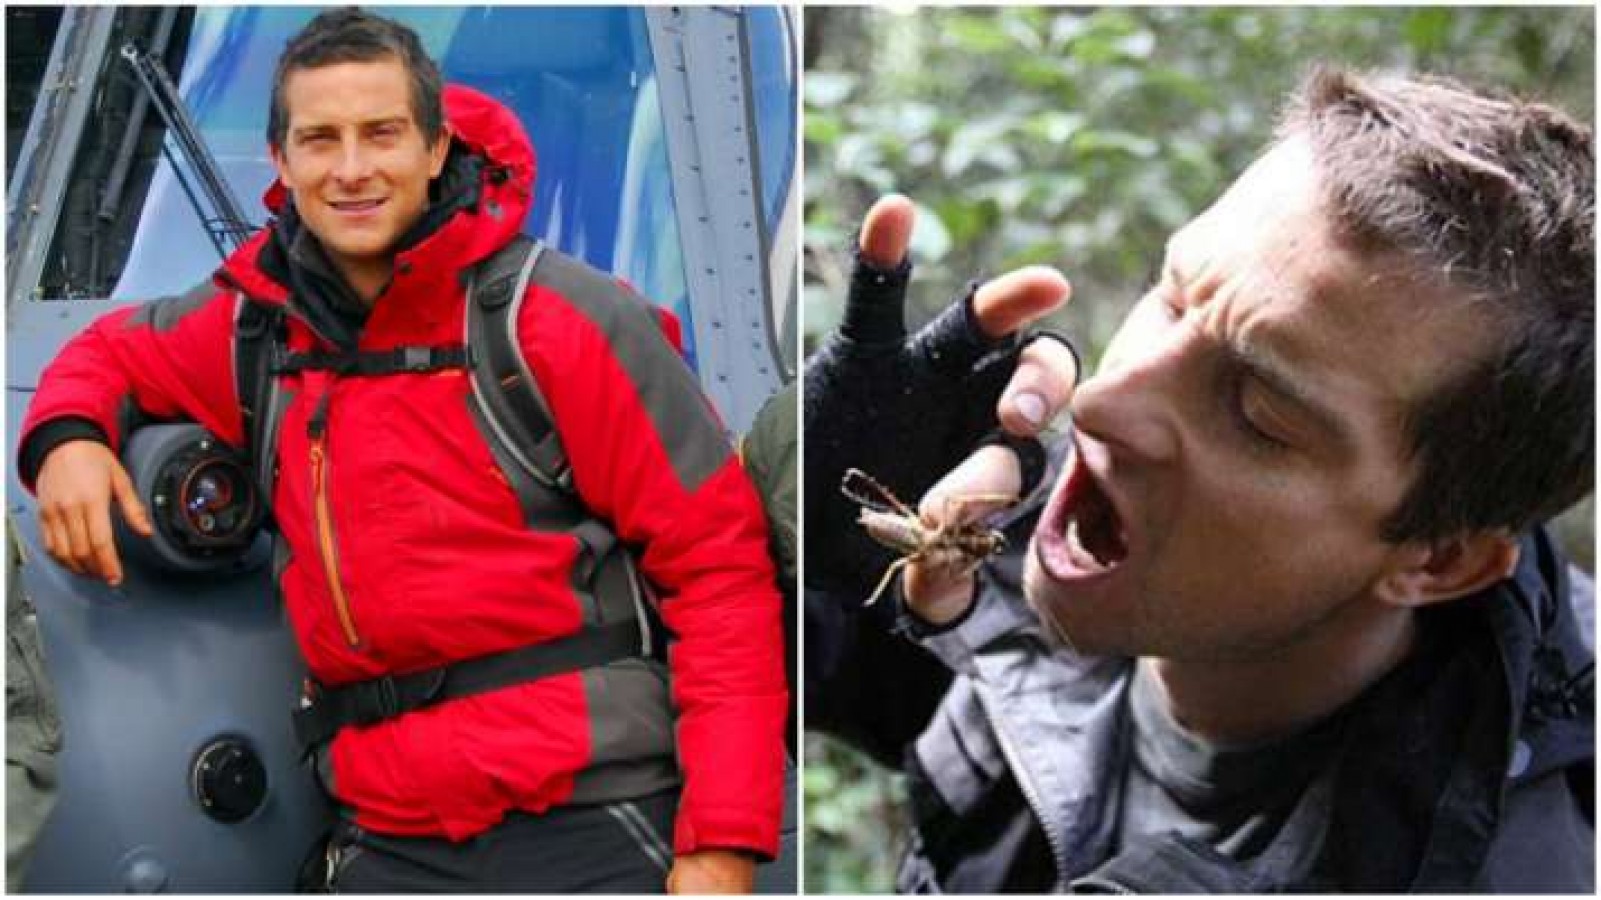 Bear Grylls used to cook food for the show at any time, now said this thing  | NewsTrack English 1